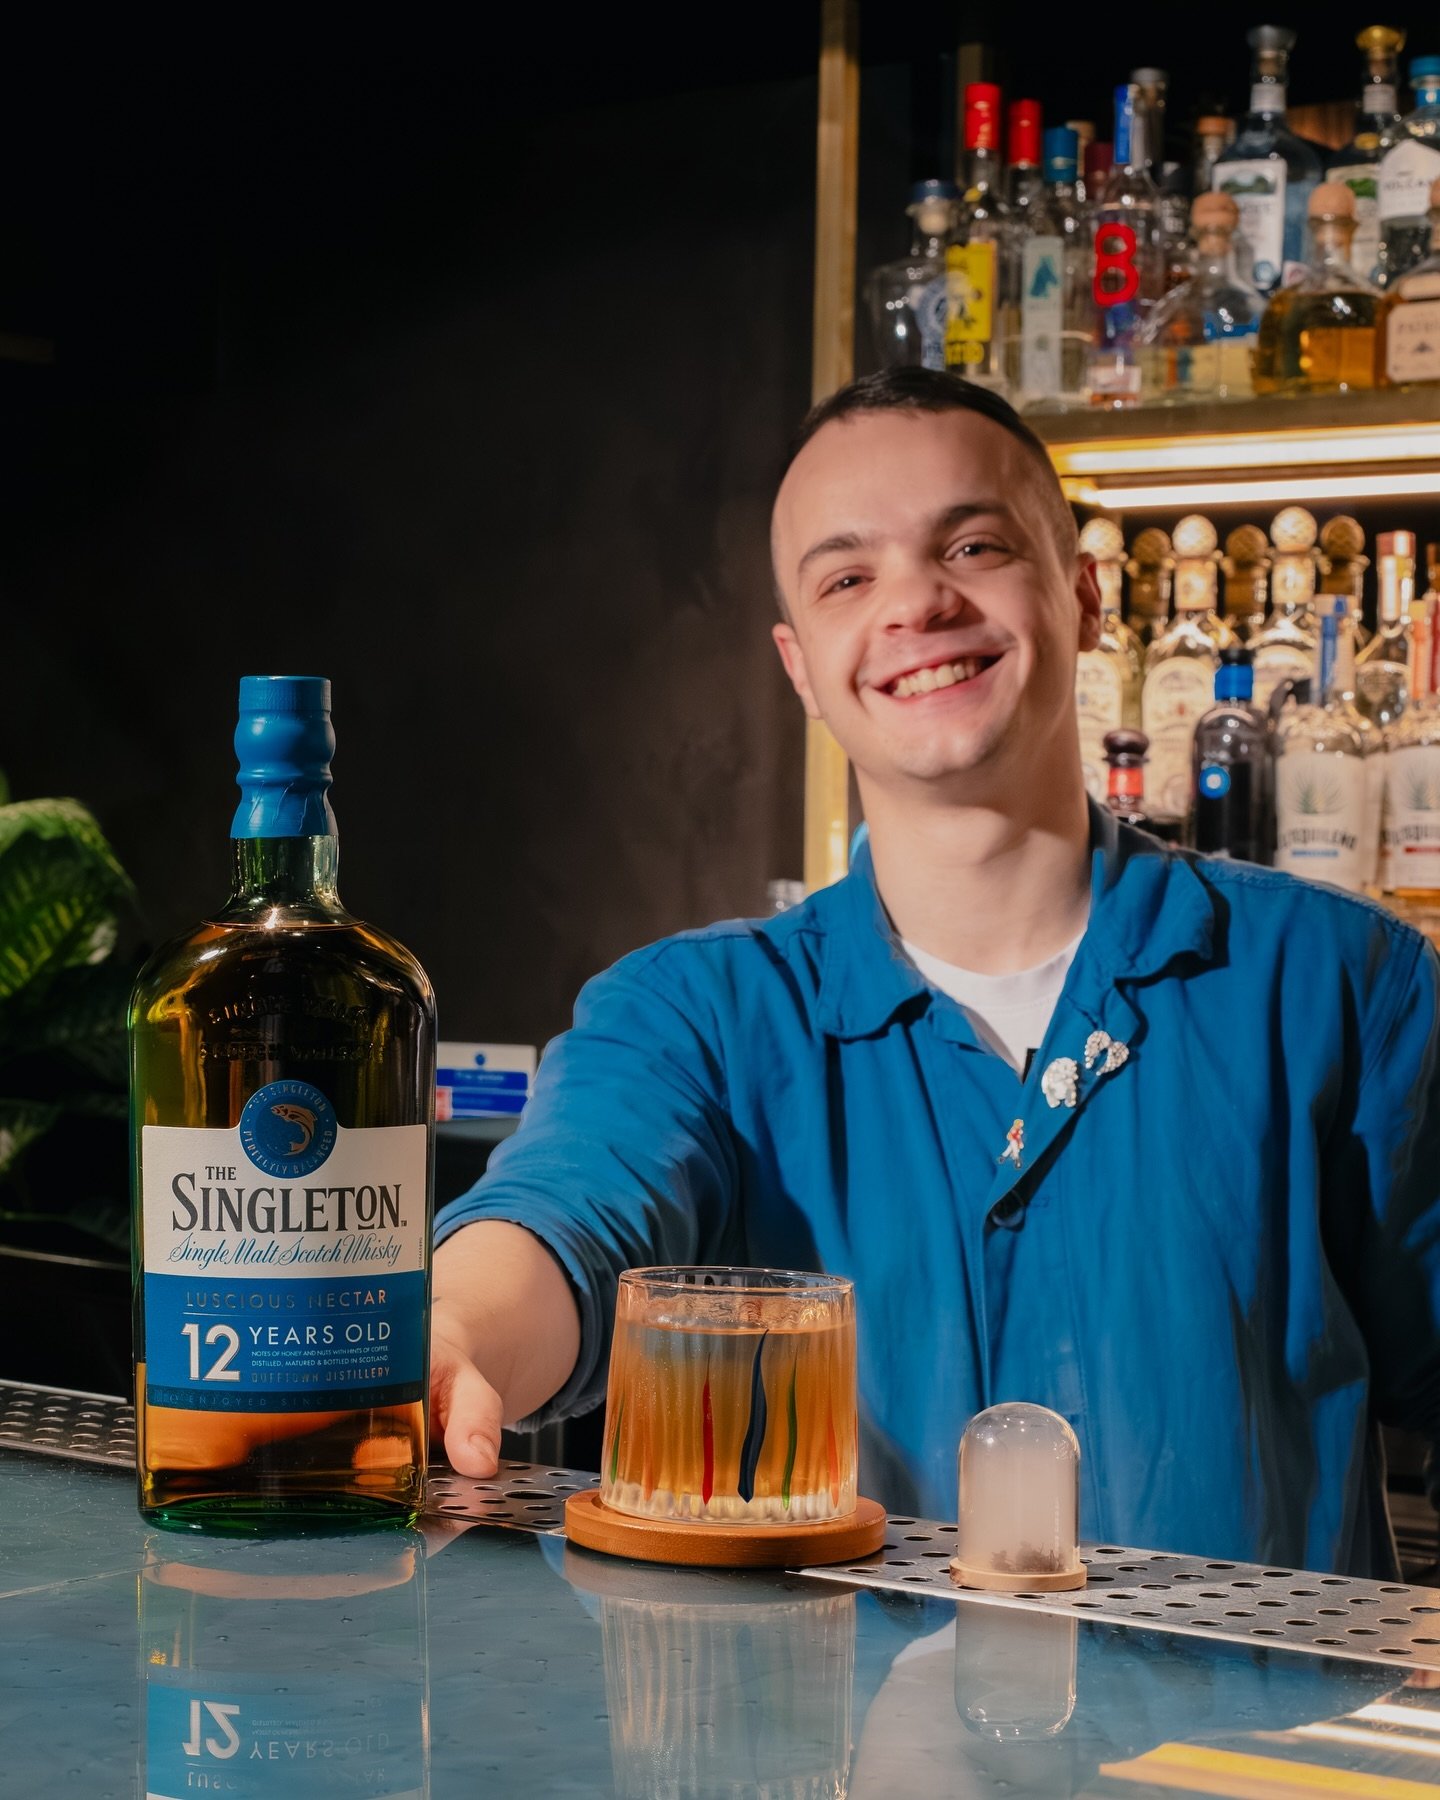 We&rsquo;re buzzing! Our peque&ntilde;o @thatsmallitalianbartender has secured a top spot in the @WorldClassGreatBritain finals, two years in a row! 

Thank you to everyone who came down to try his World Class Cocktail menu last month. Now onto the U